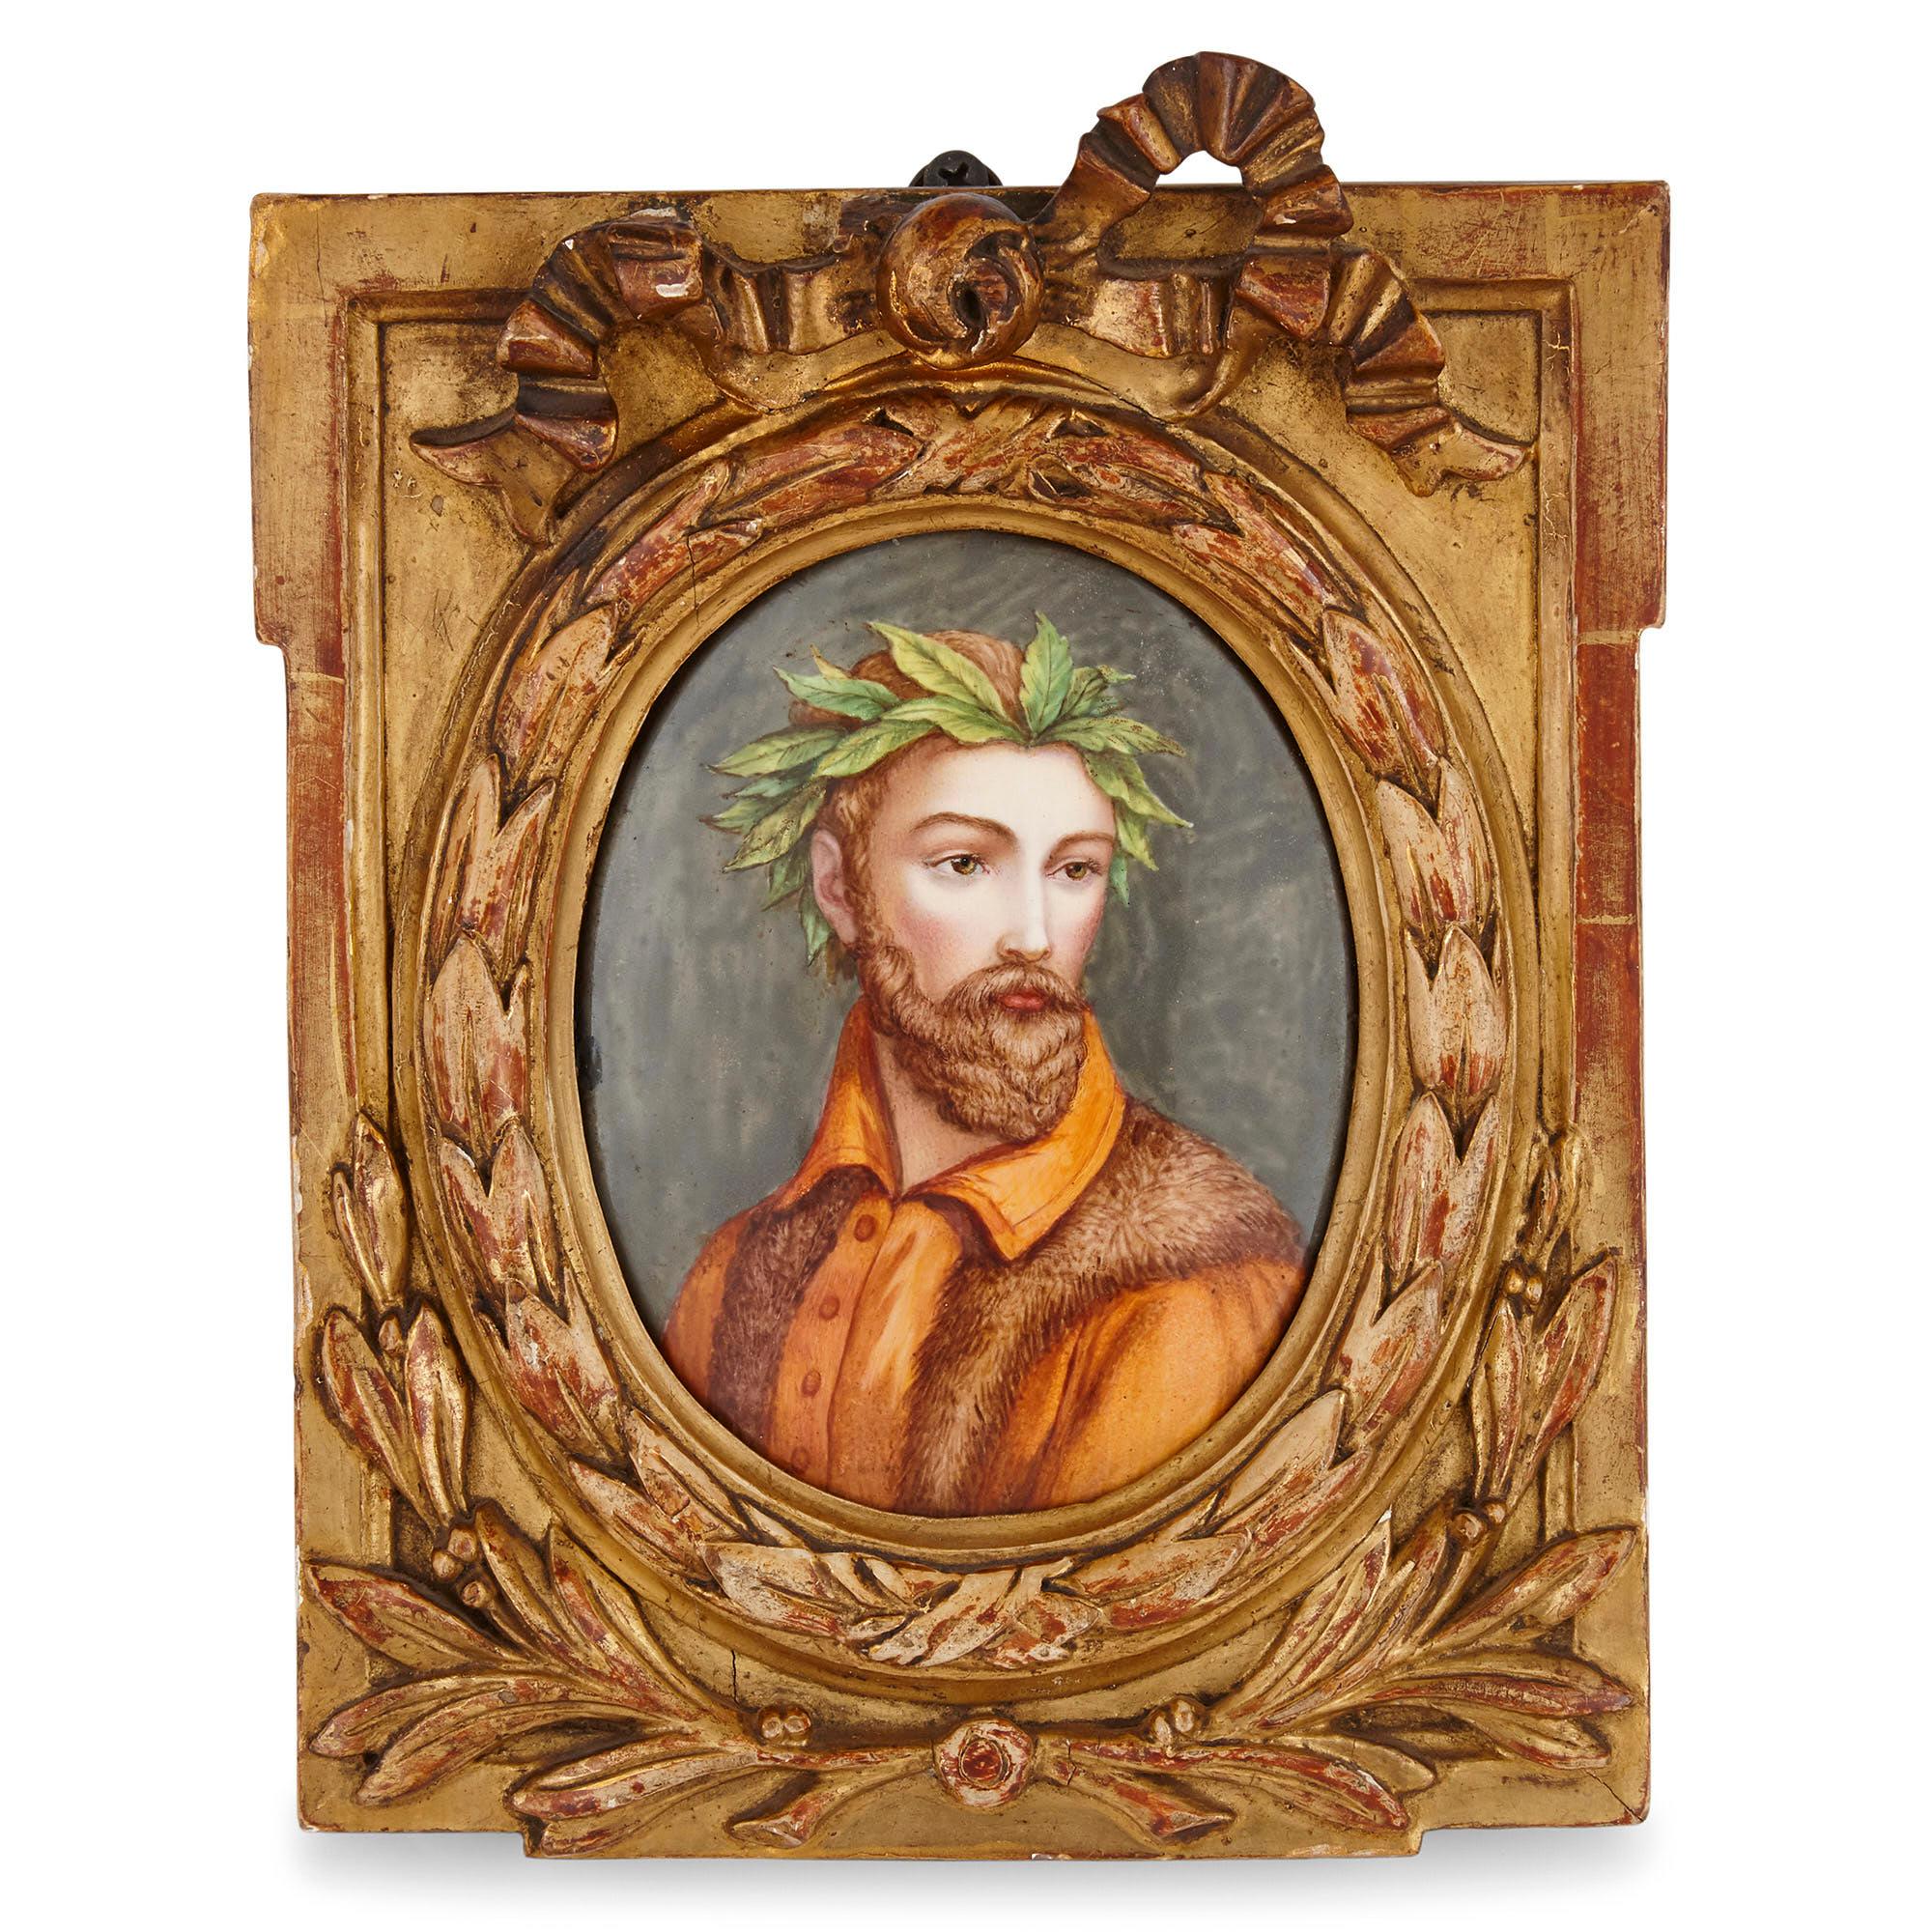 Pair of Renaissance style enamel plaques in giltwood frames
French, 19th Century
Dimensions: Frames: Height 24cm, width 18cm, depth 3cm
Plaques: Height 13cm, width 10cm

Held in ornately carved neoclassical giltwood frames, these Limoges enamel